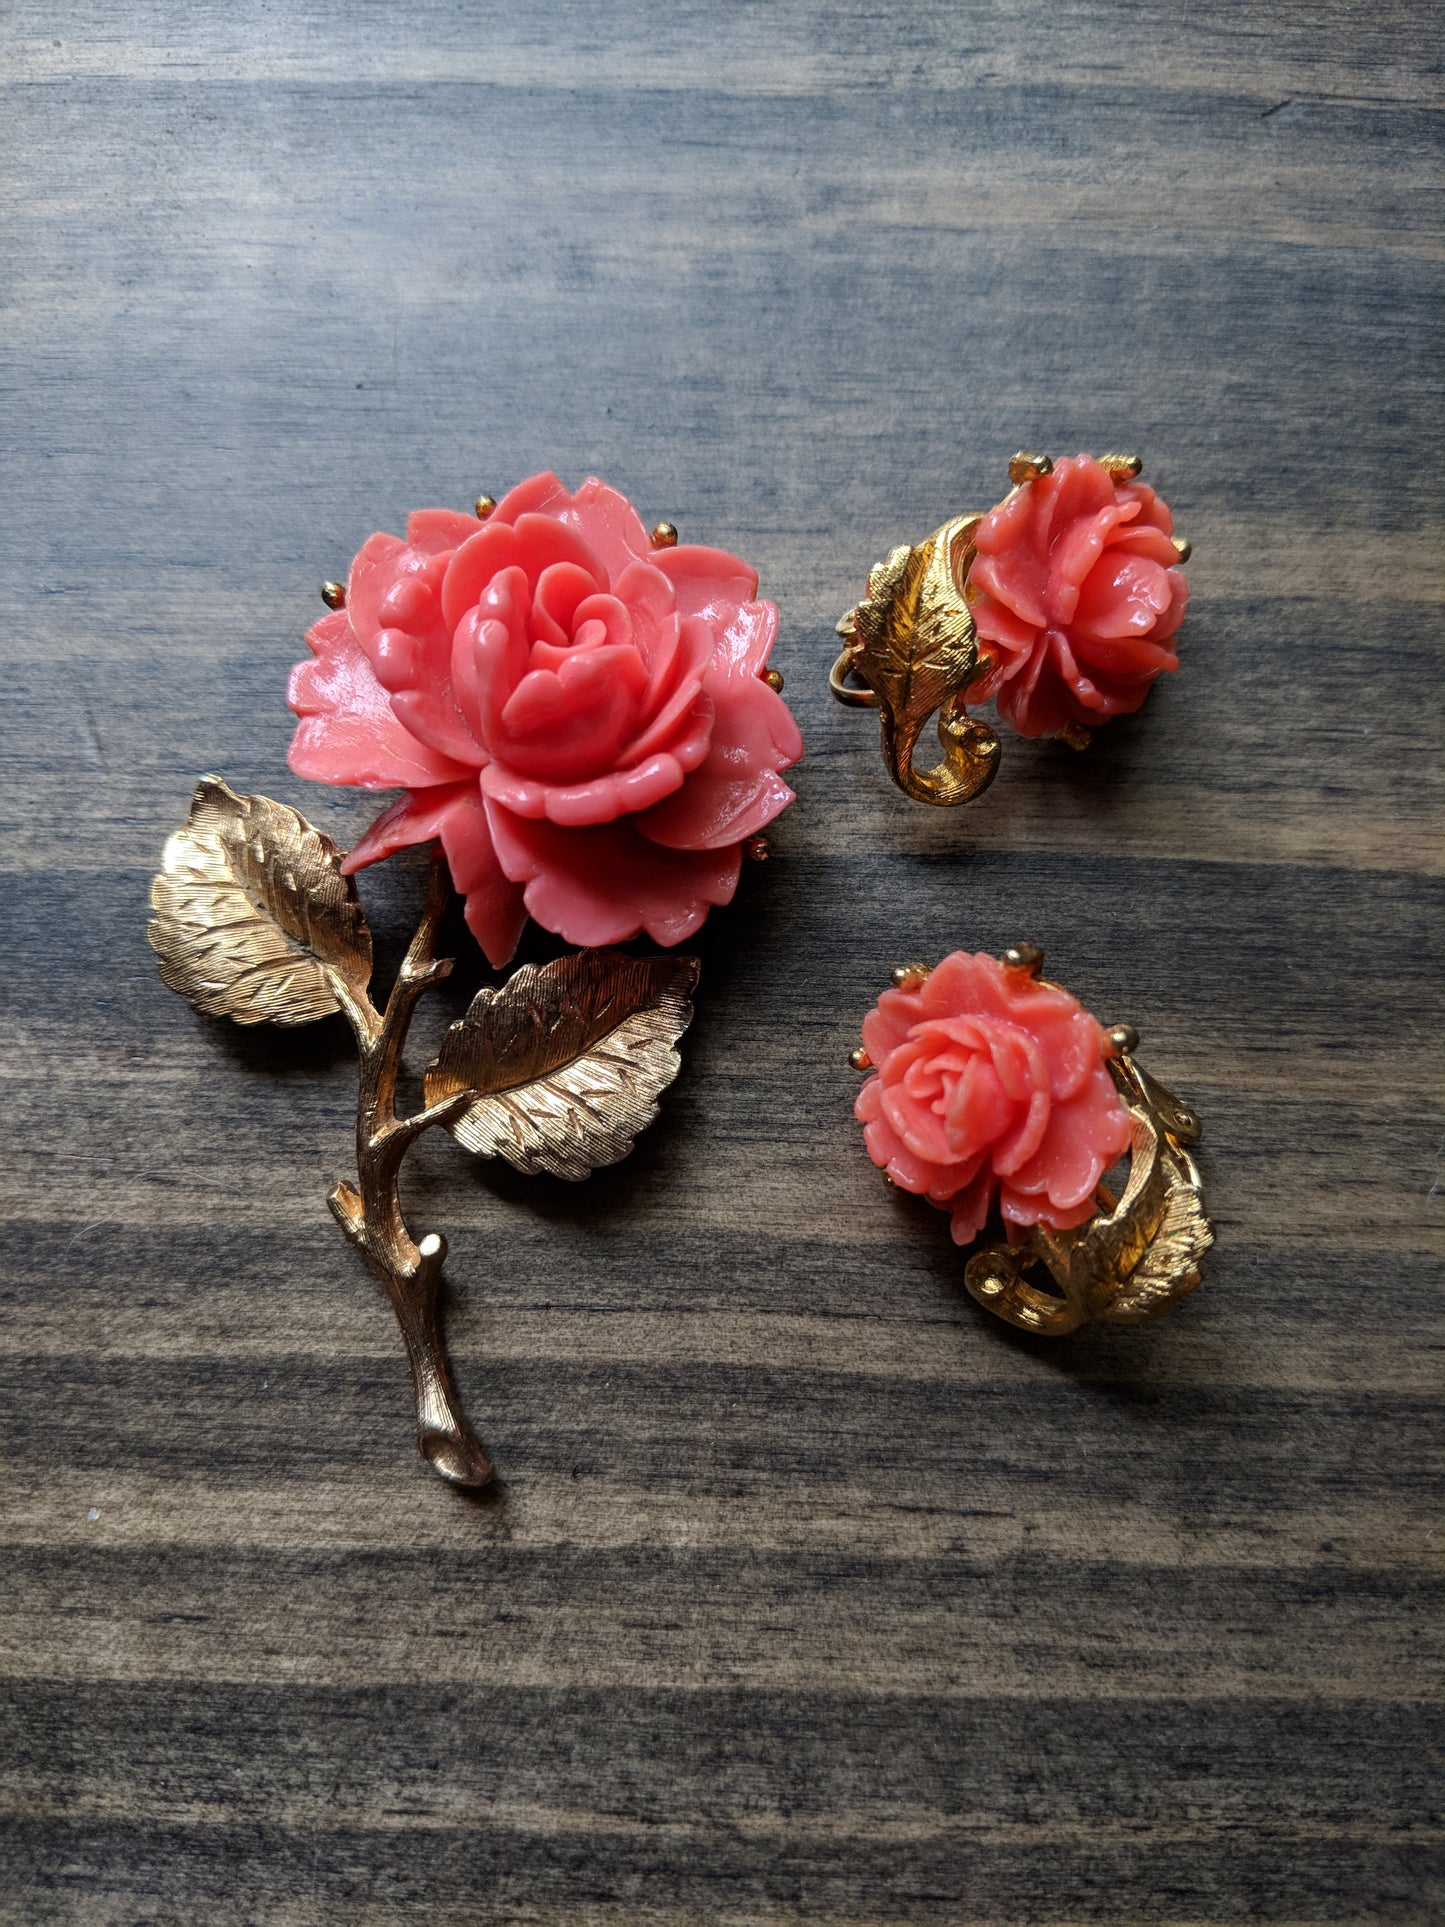 Vintage Brooch & Earrings Demi Coral Colored Carved Rose Pin w/ matching Earrings